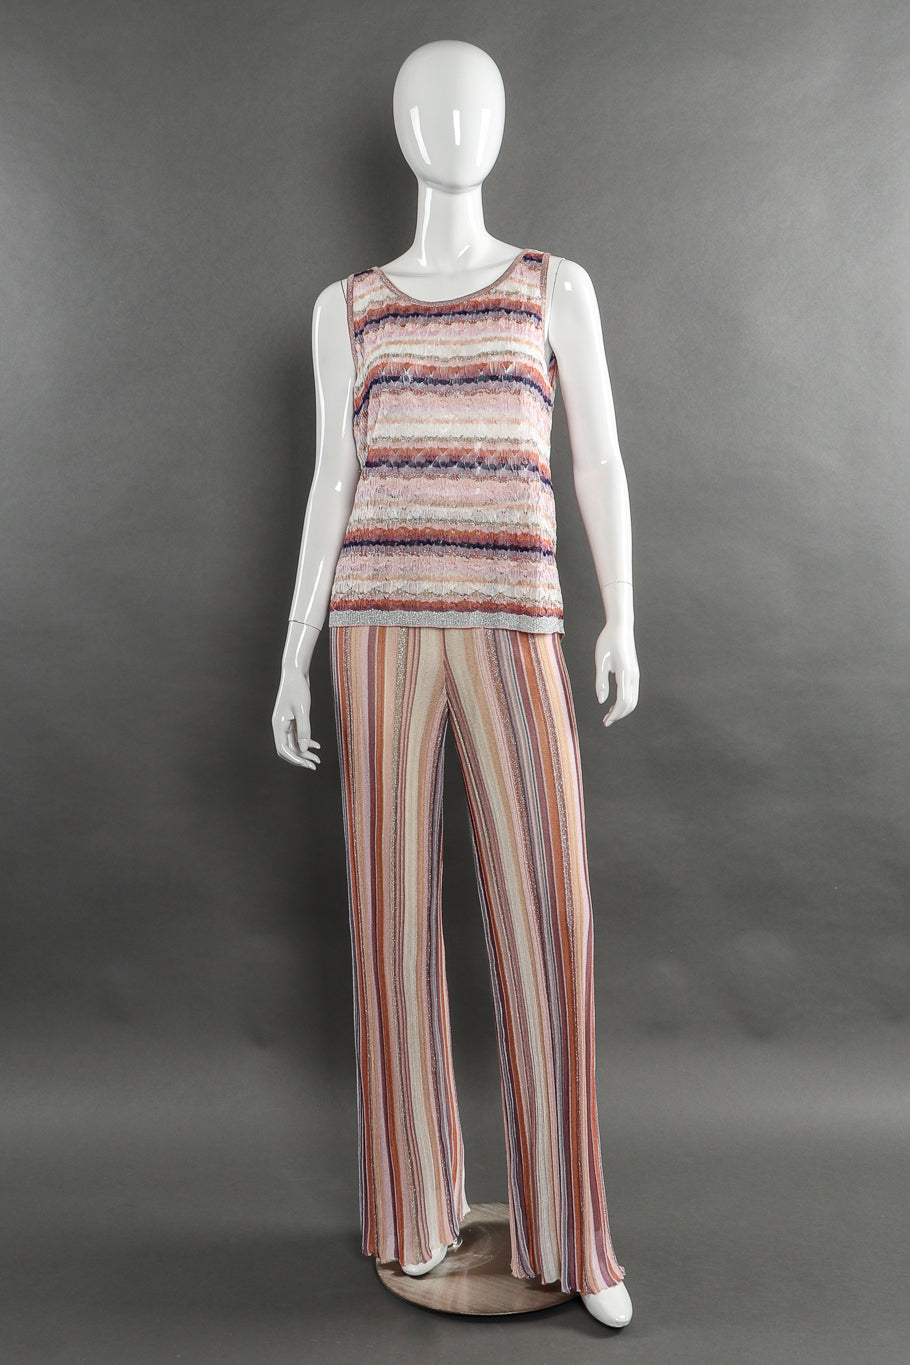 Missoni Striped Knit Duster, Tank, and Pants Set front view of tank and pant on mannequin @Recessla